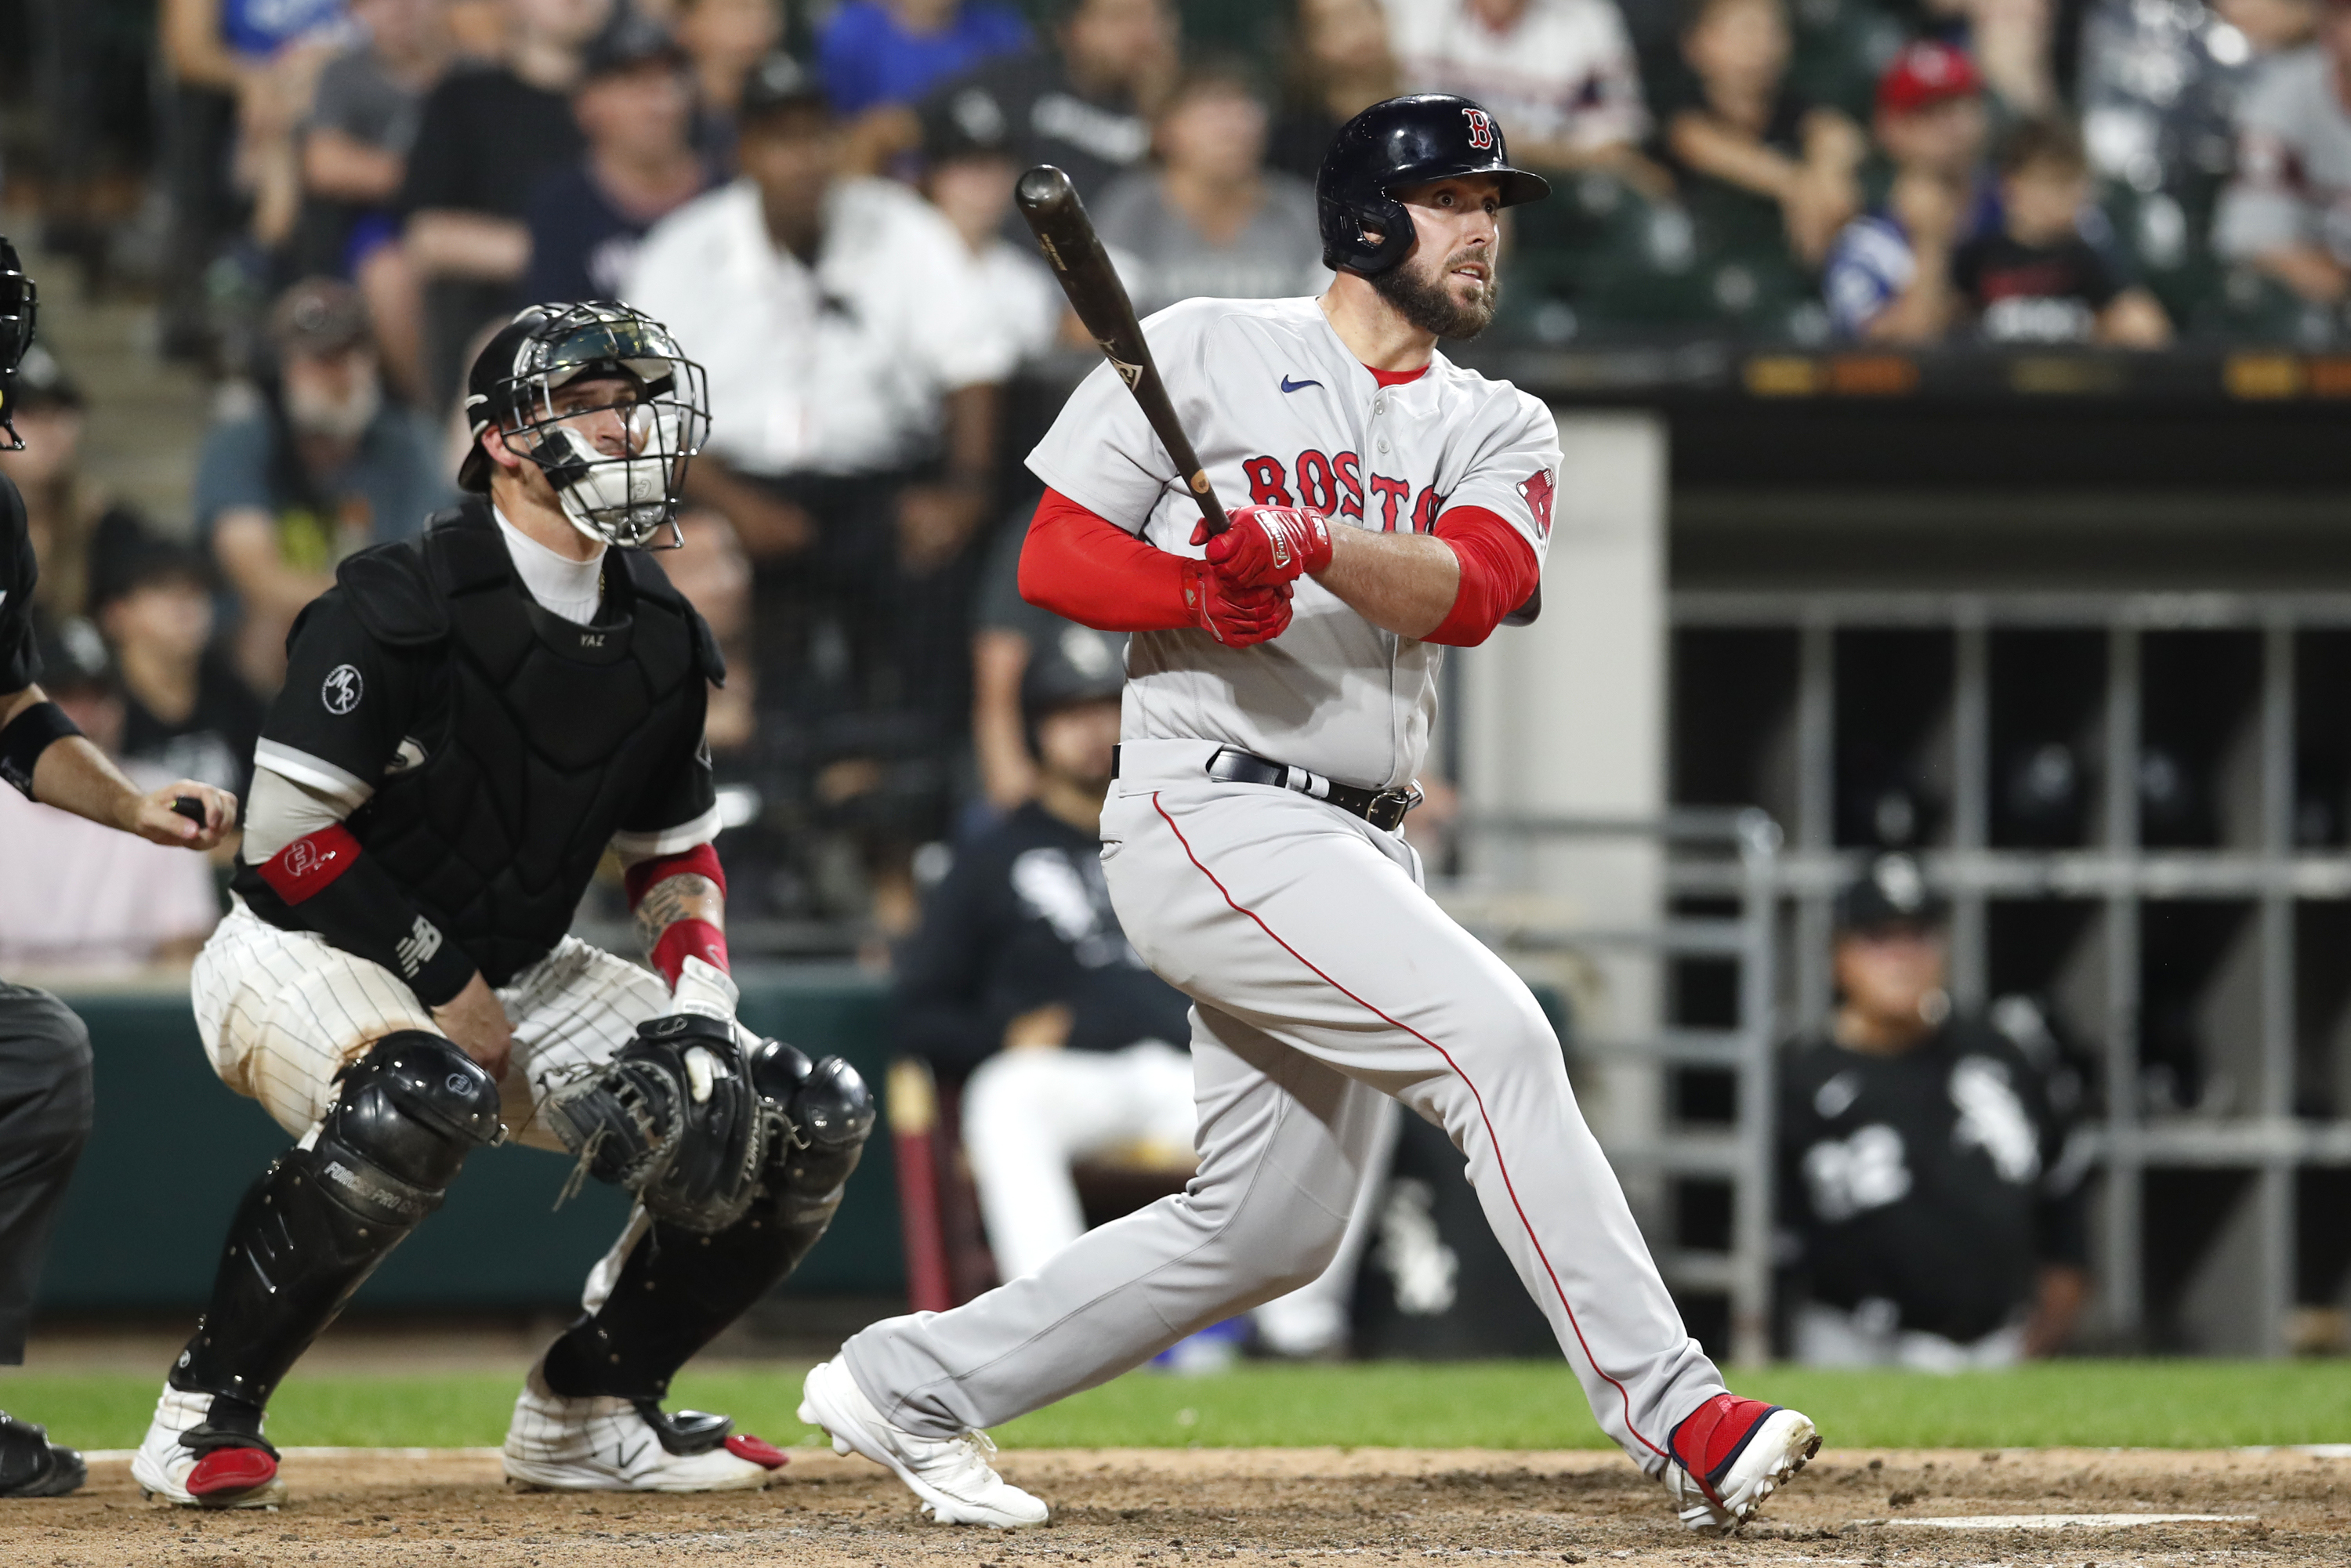 Red Sox rebound with big win over White Sox on Patriots' Day